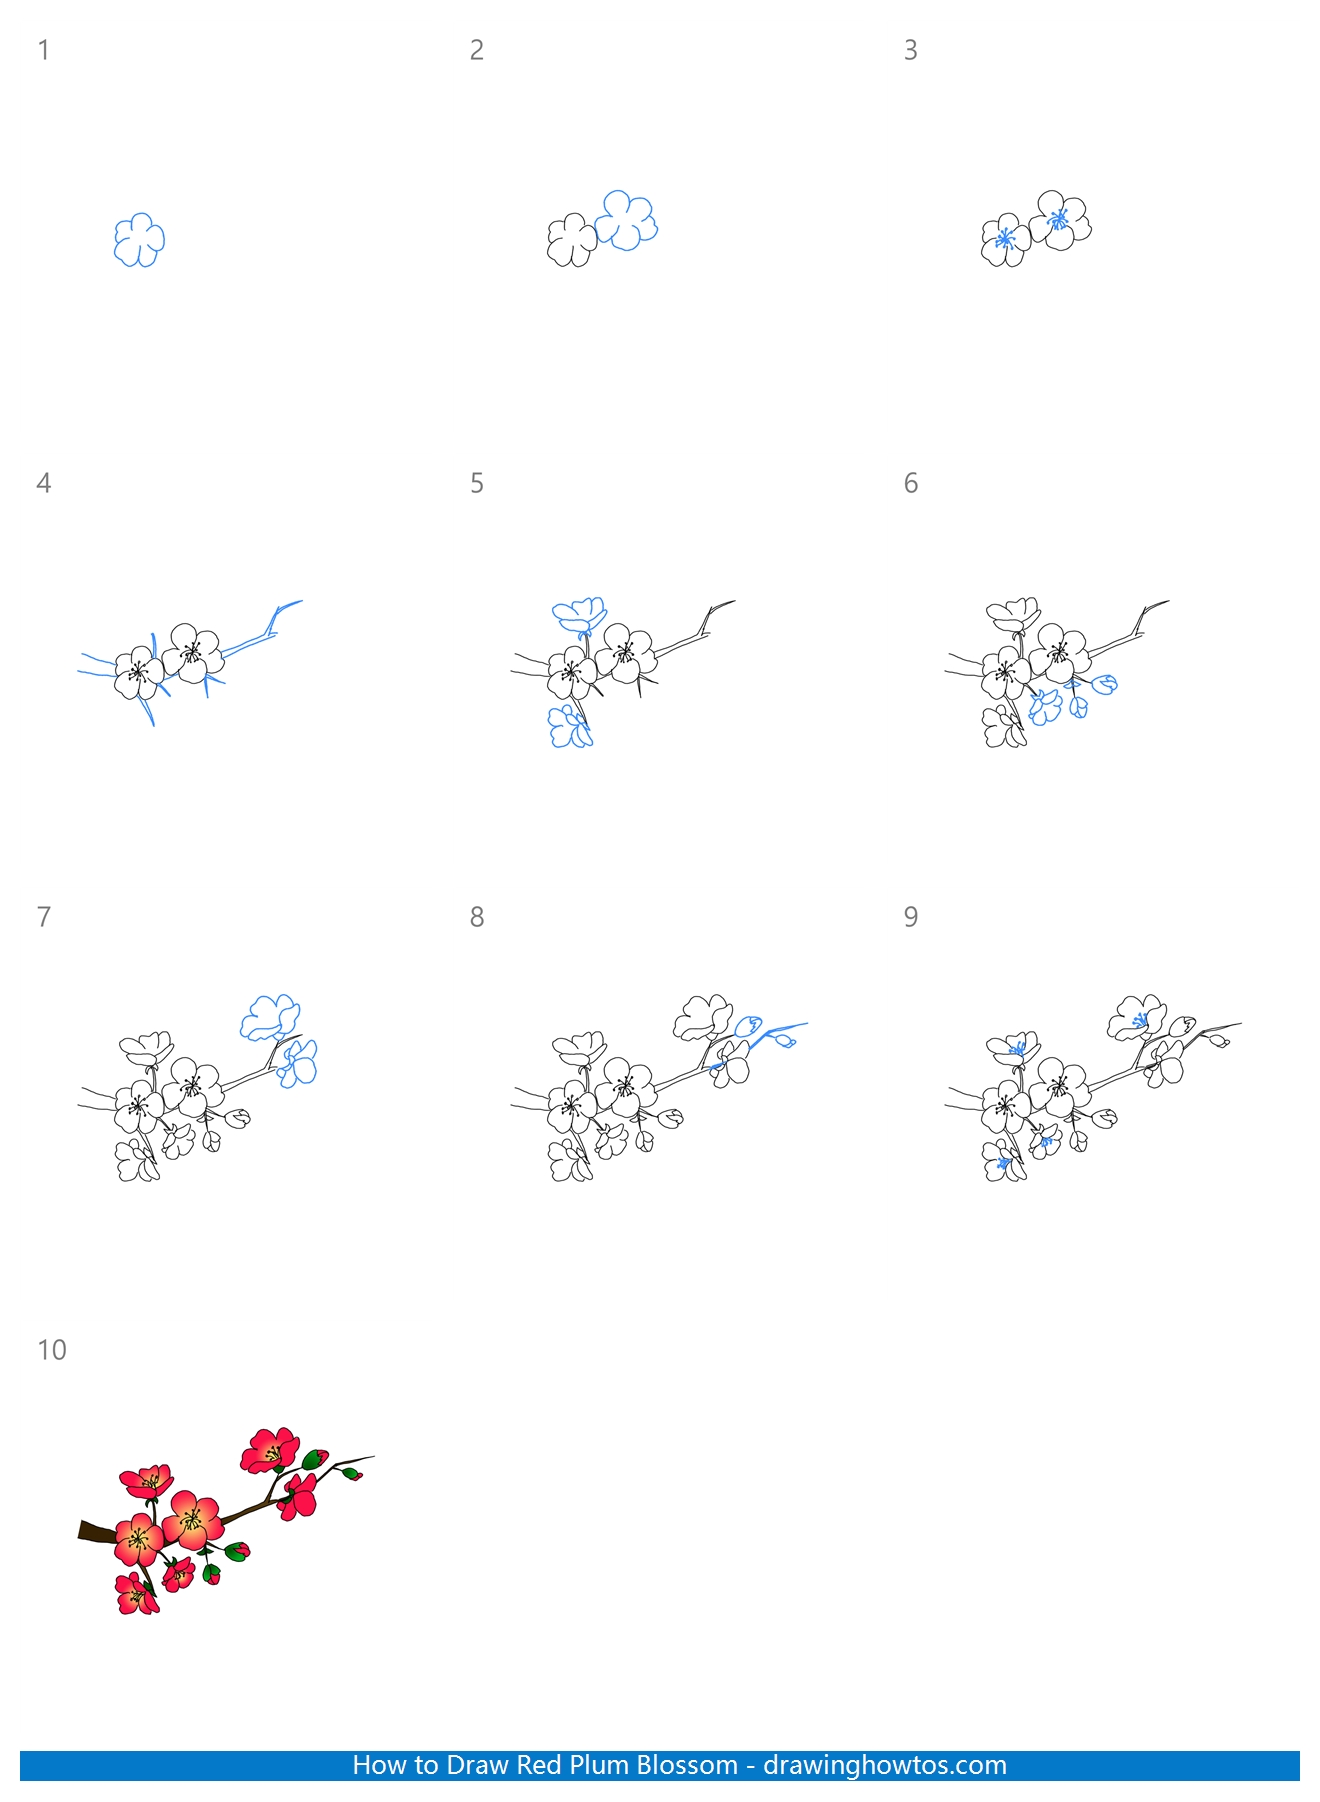 How to Draw Red Plum Blossoms Step by Step